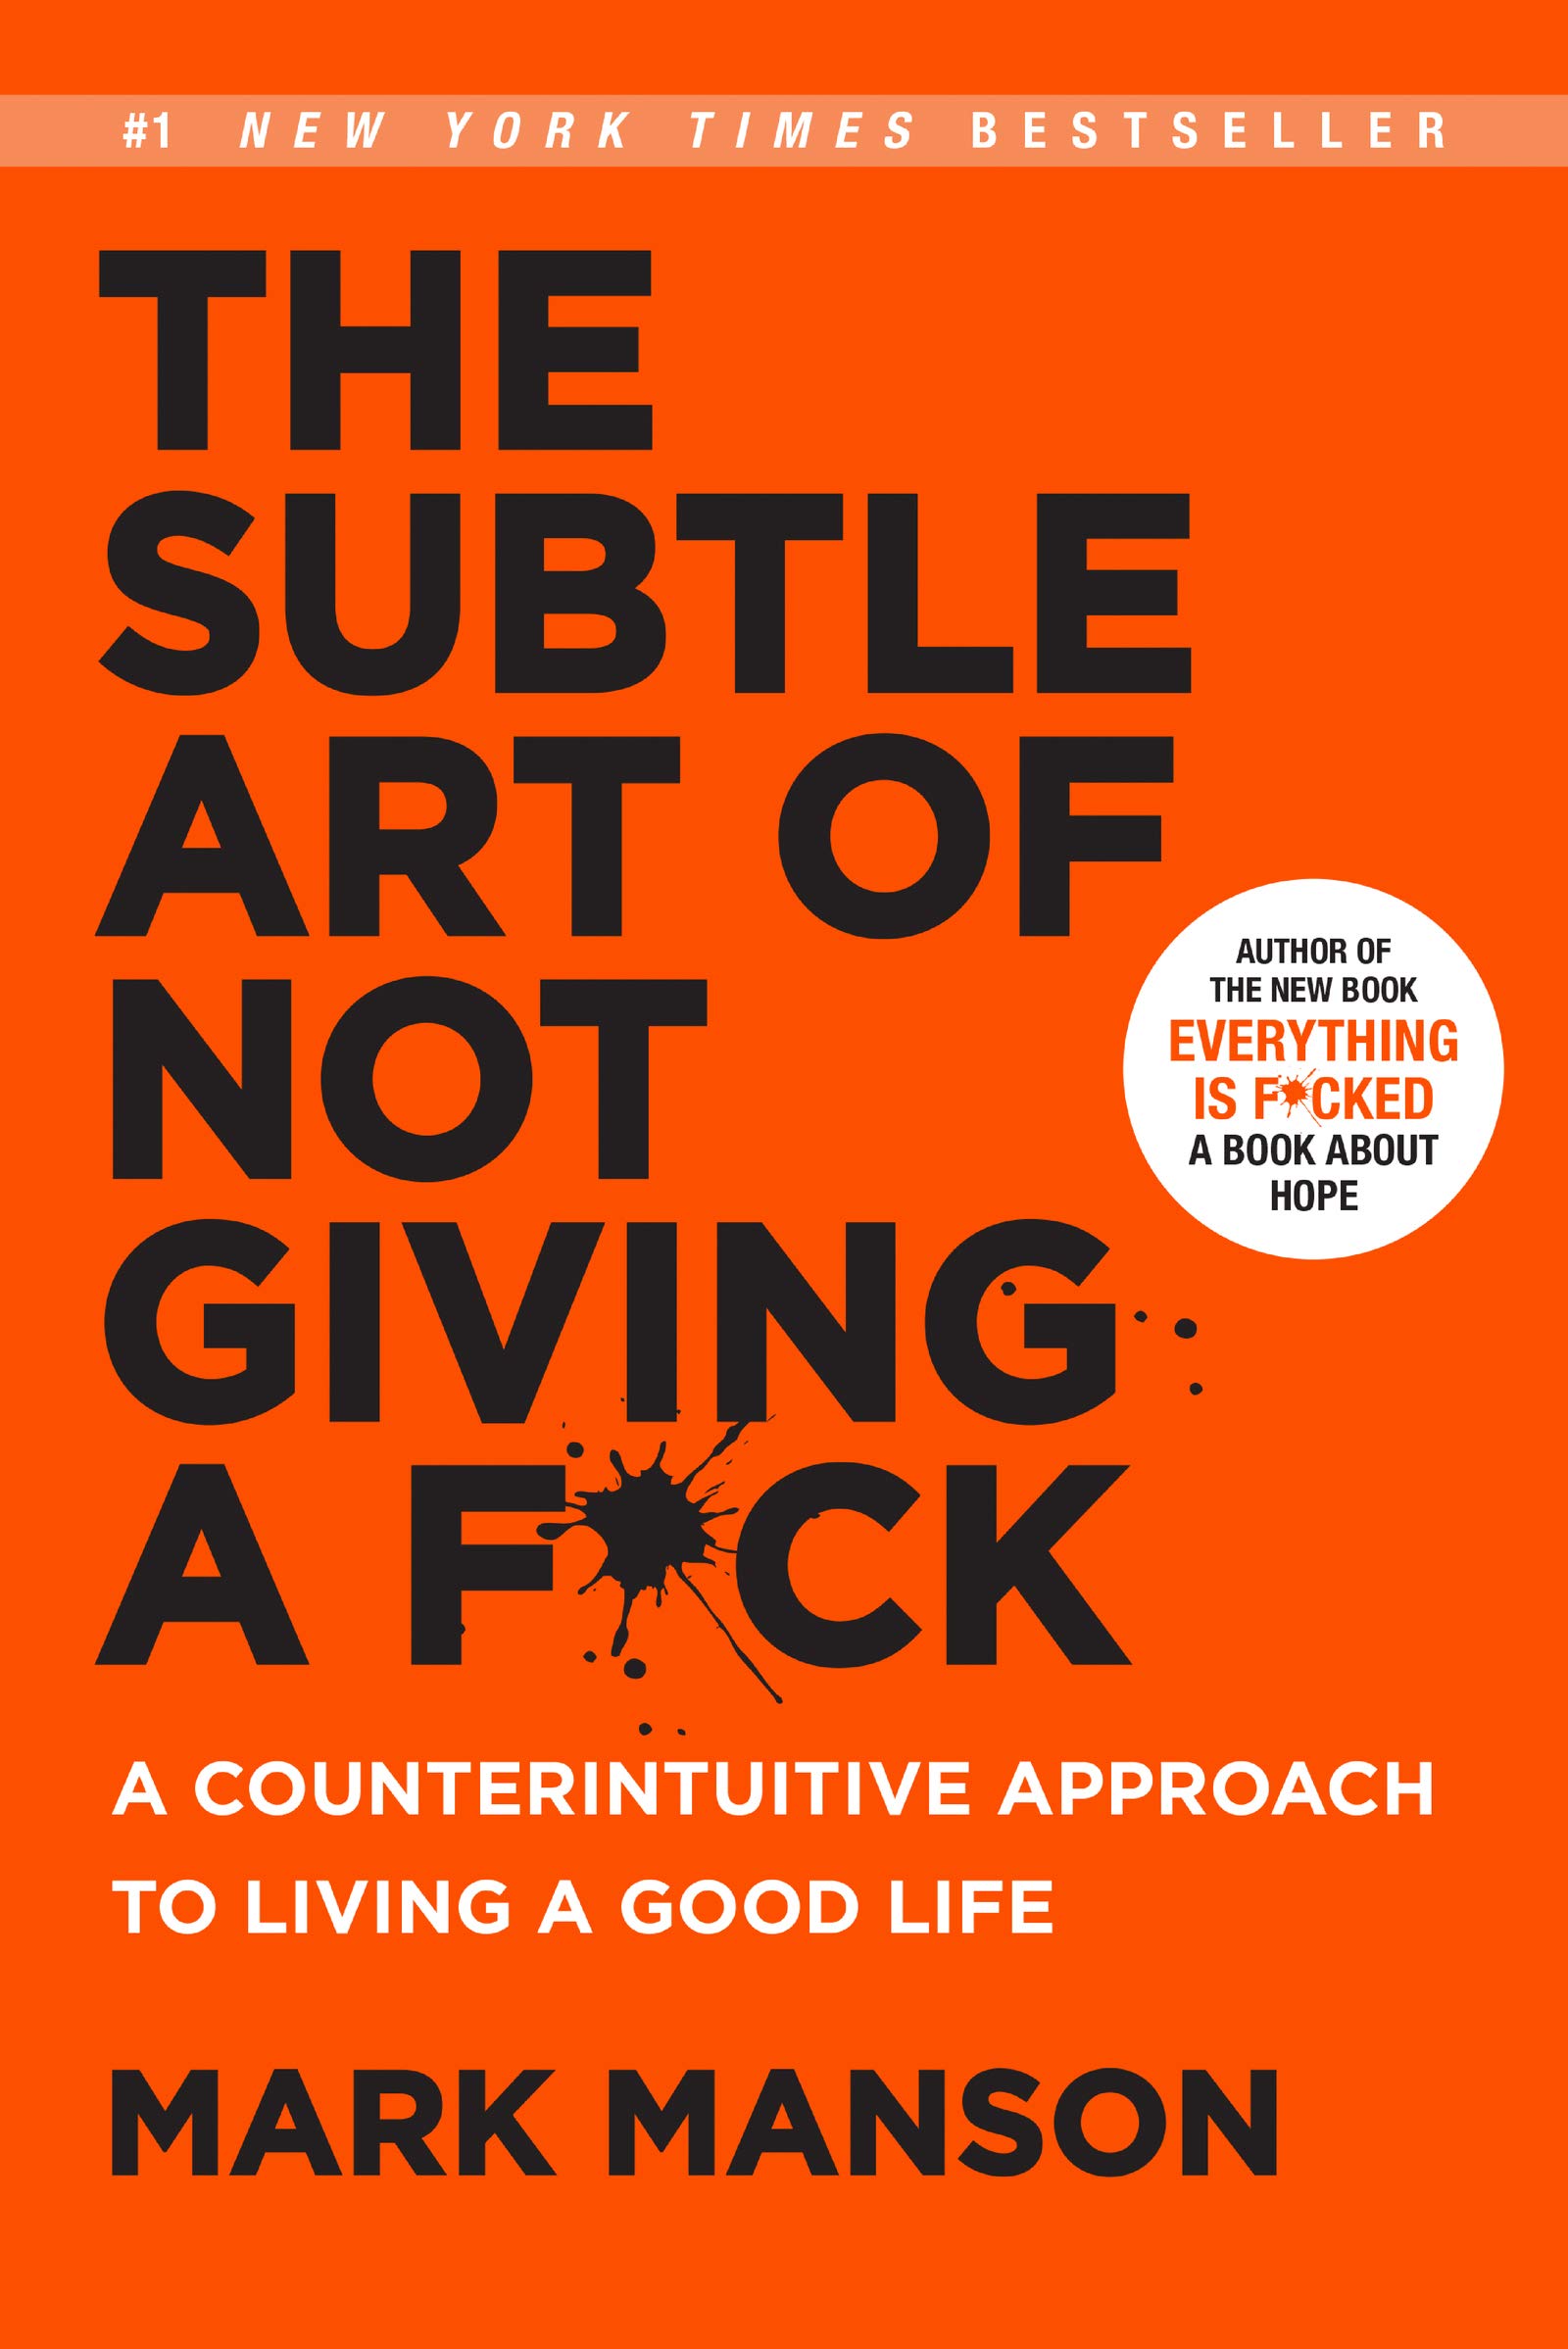 The subtle art of not giving a fuck by mark manson